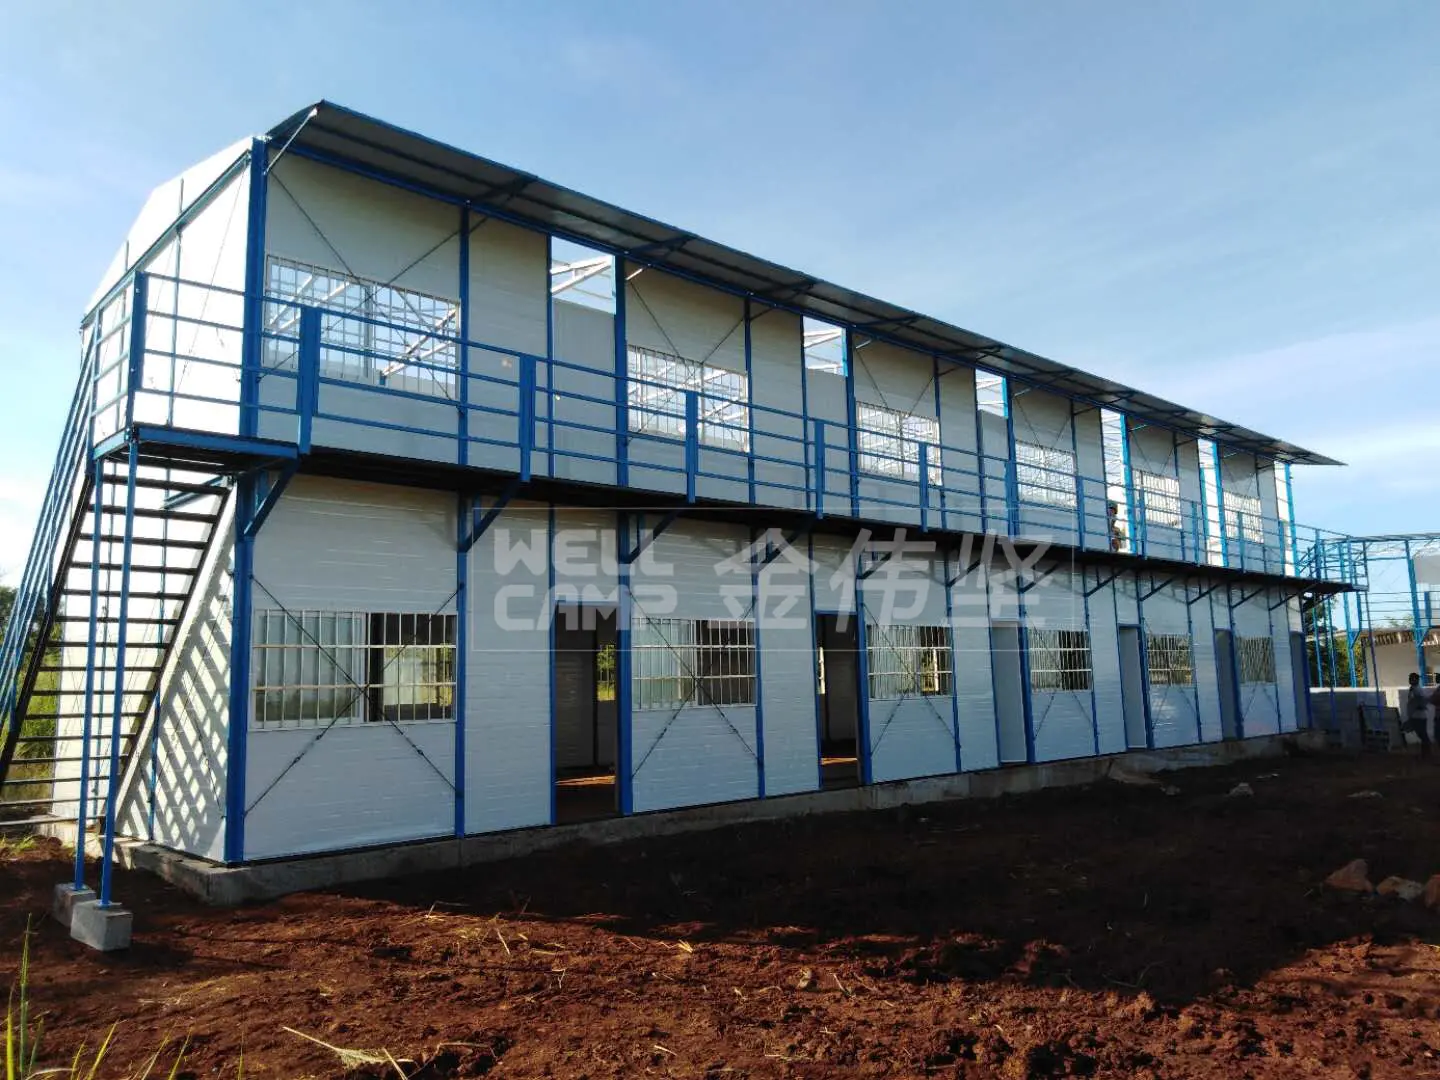 Hot selling affordable steel prefab labor camp k house quick assembled living room dormitory office school knockdown houses